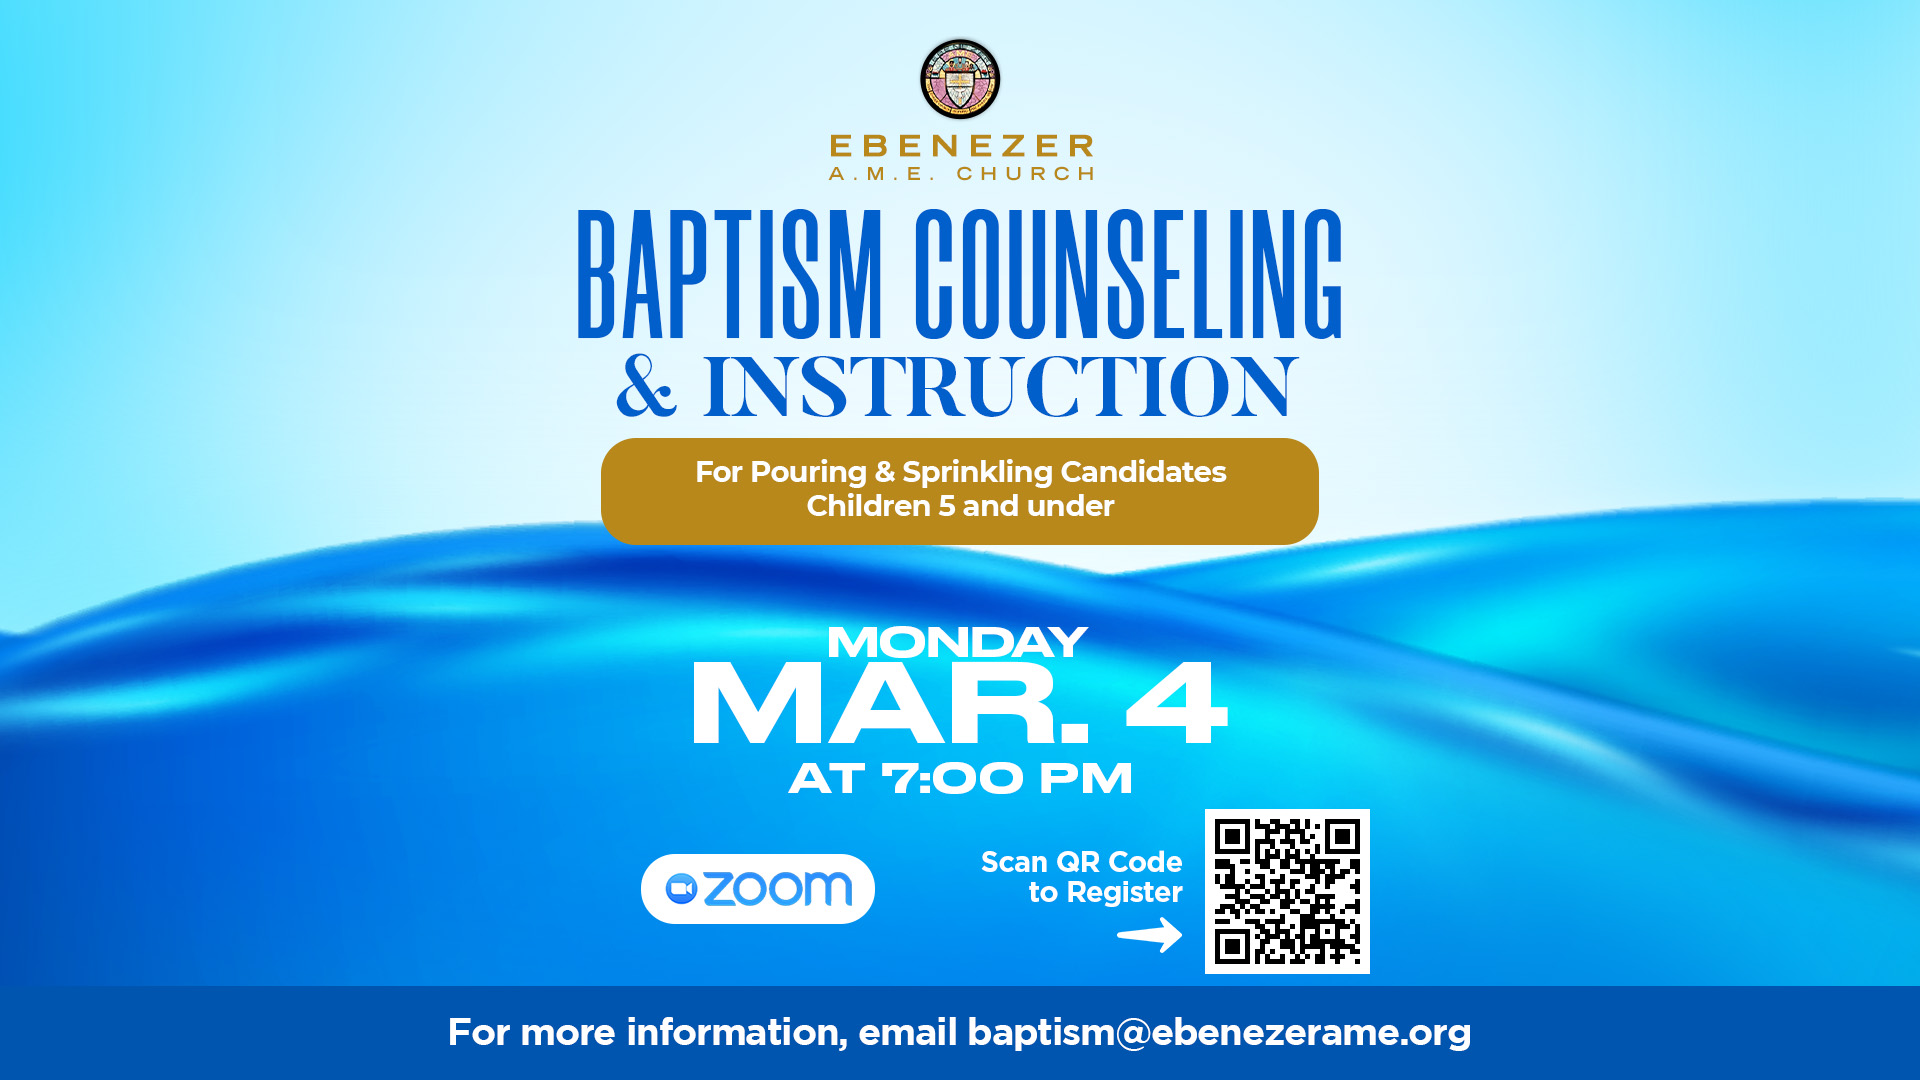 Baptism for Pouring & Sprinkling on March 4